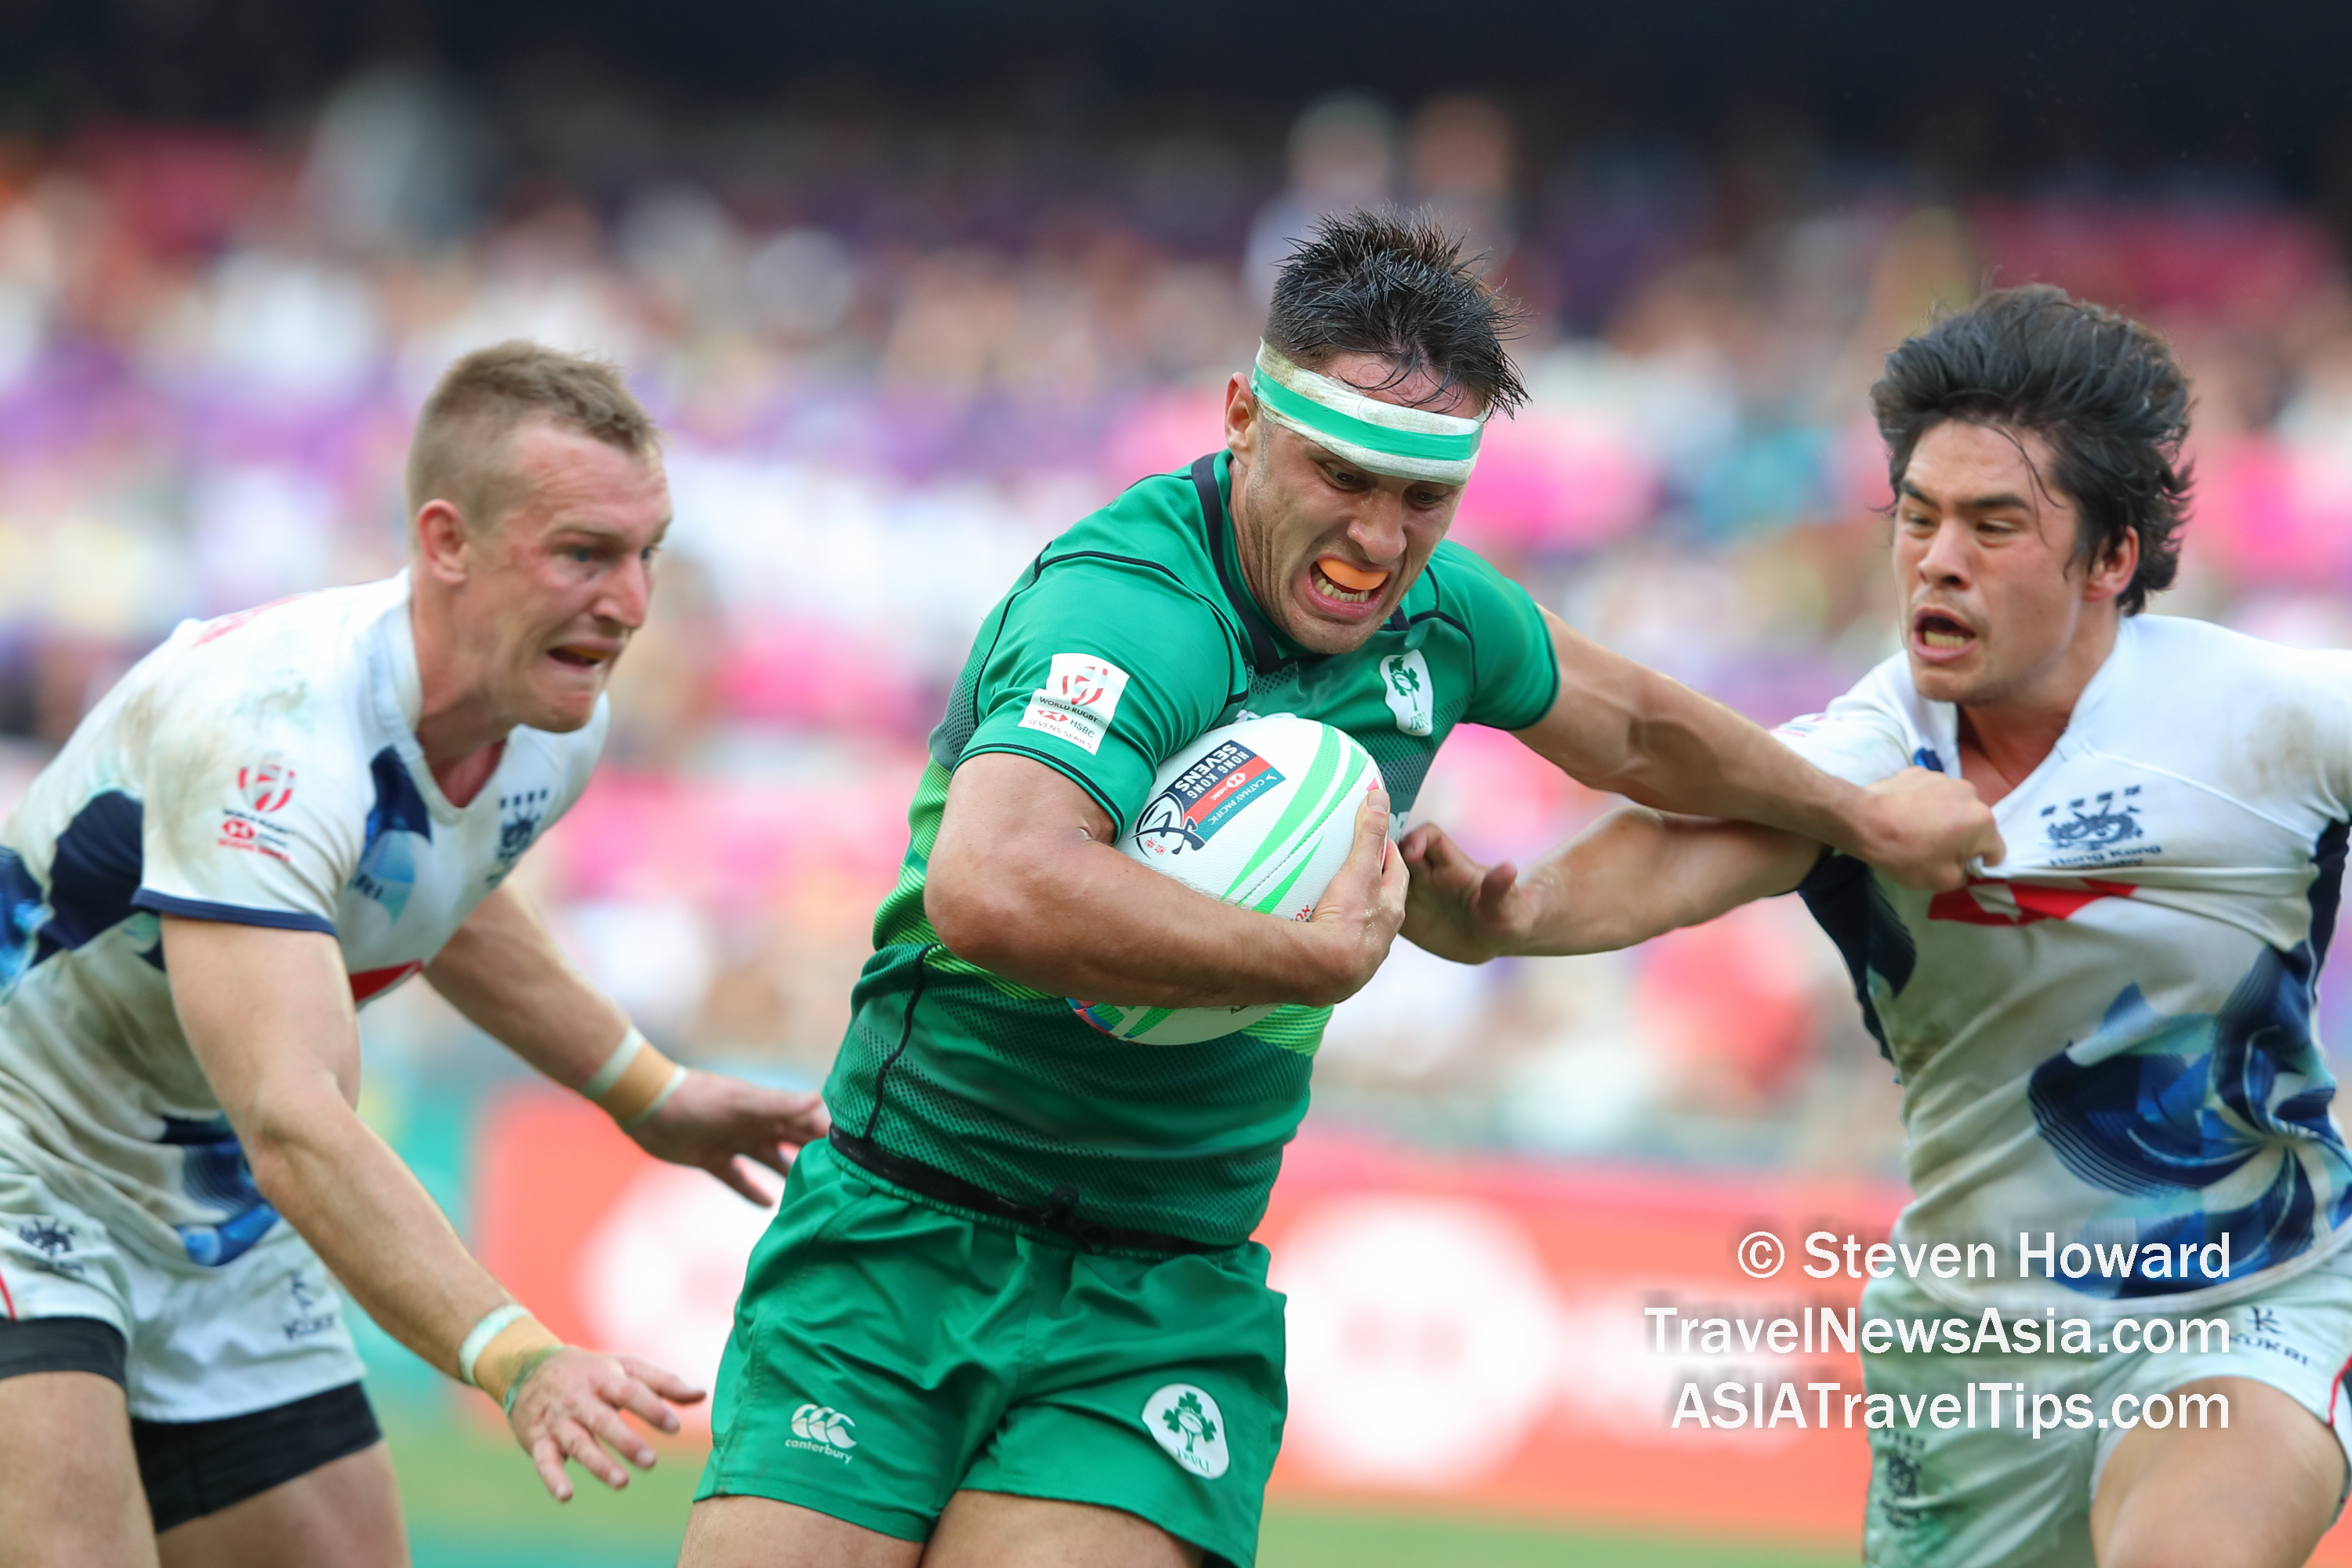 Ireland in action against Hong Kong in 2019, the last time Hong Kong hosted the HK7s. Picture by Steven Howard of TravelNewsAsia.com Click to enlarge.